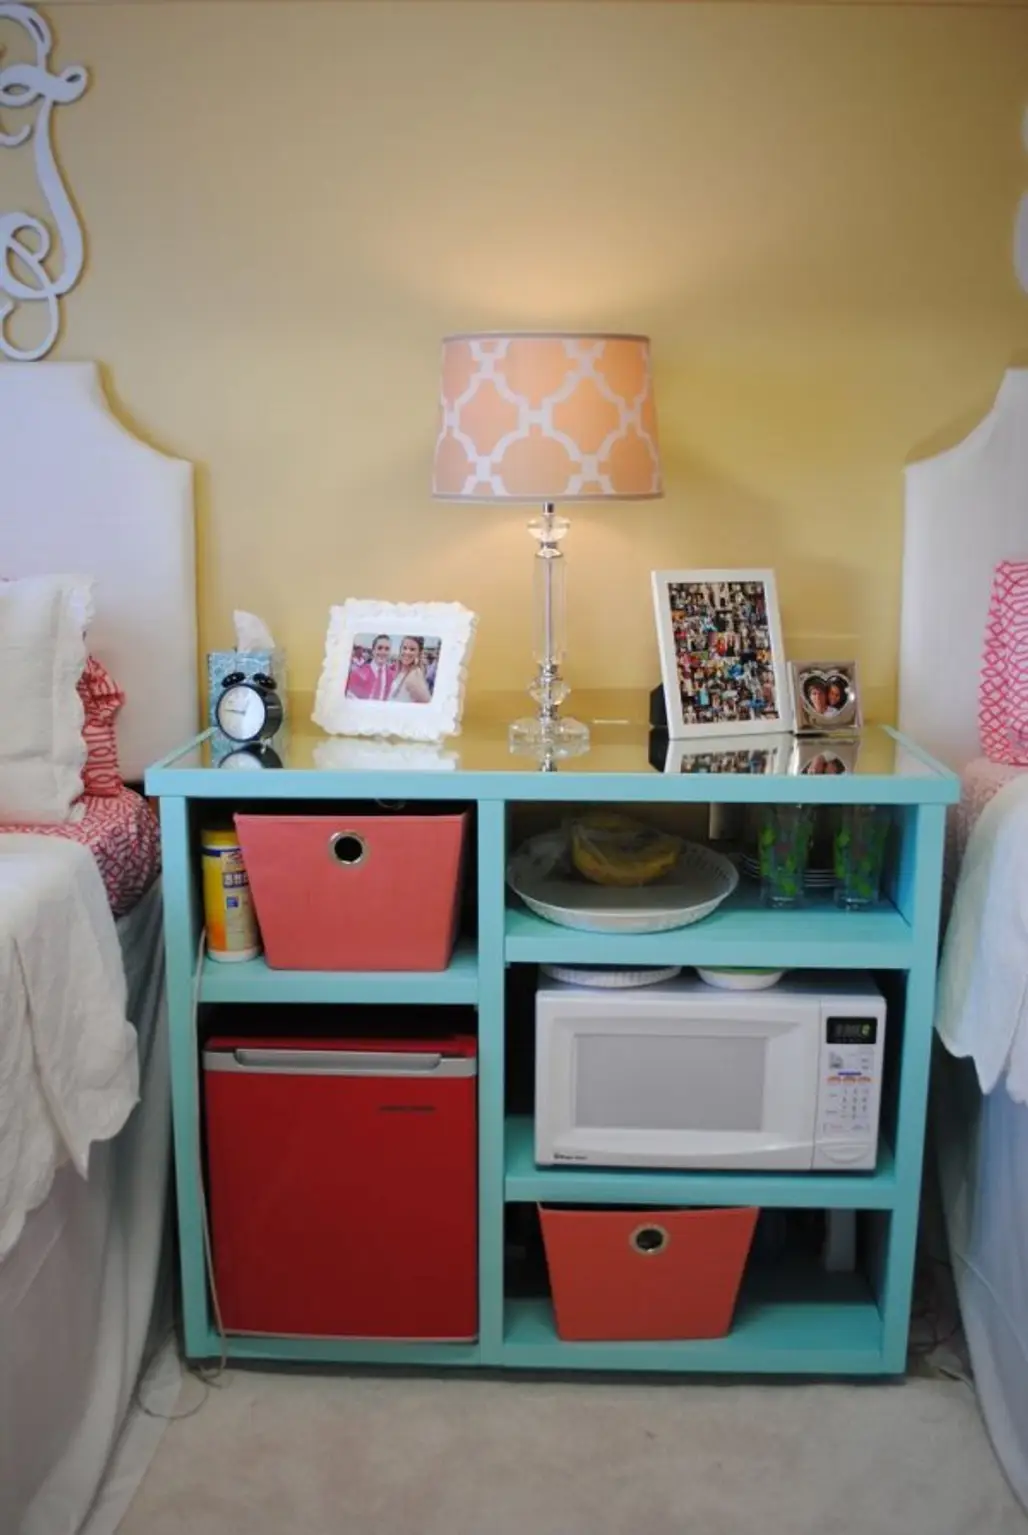 A Custom Built Nightstand for Your Mini-fridge and Microwave